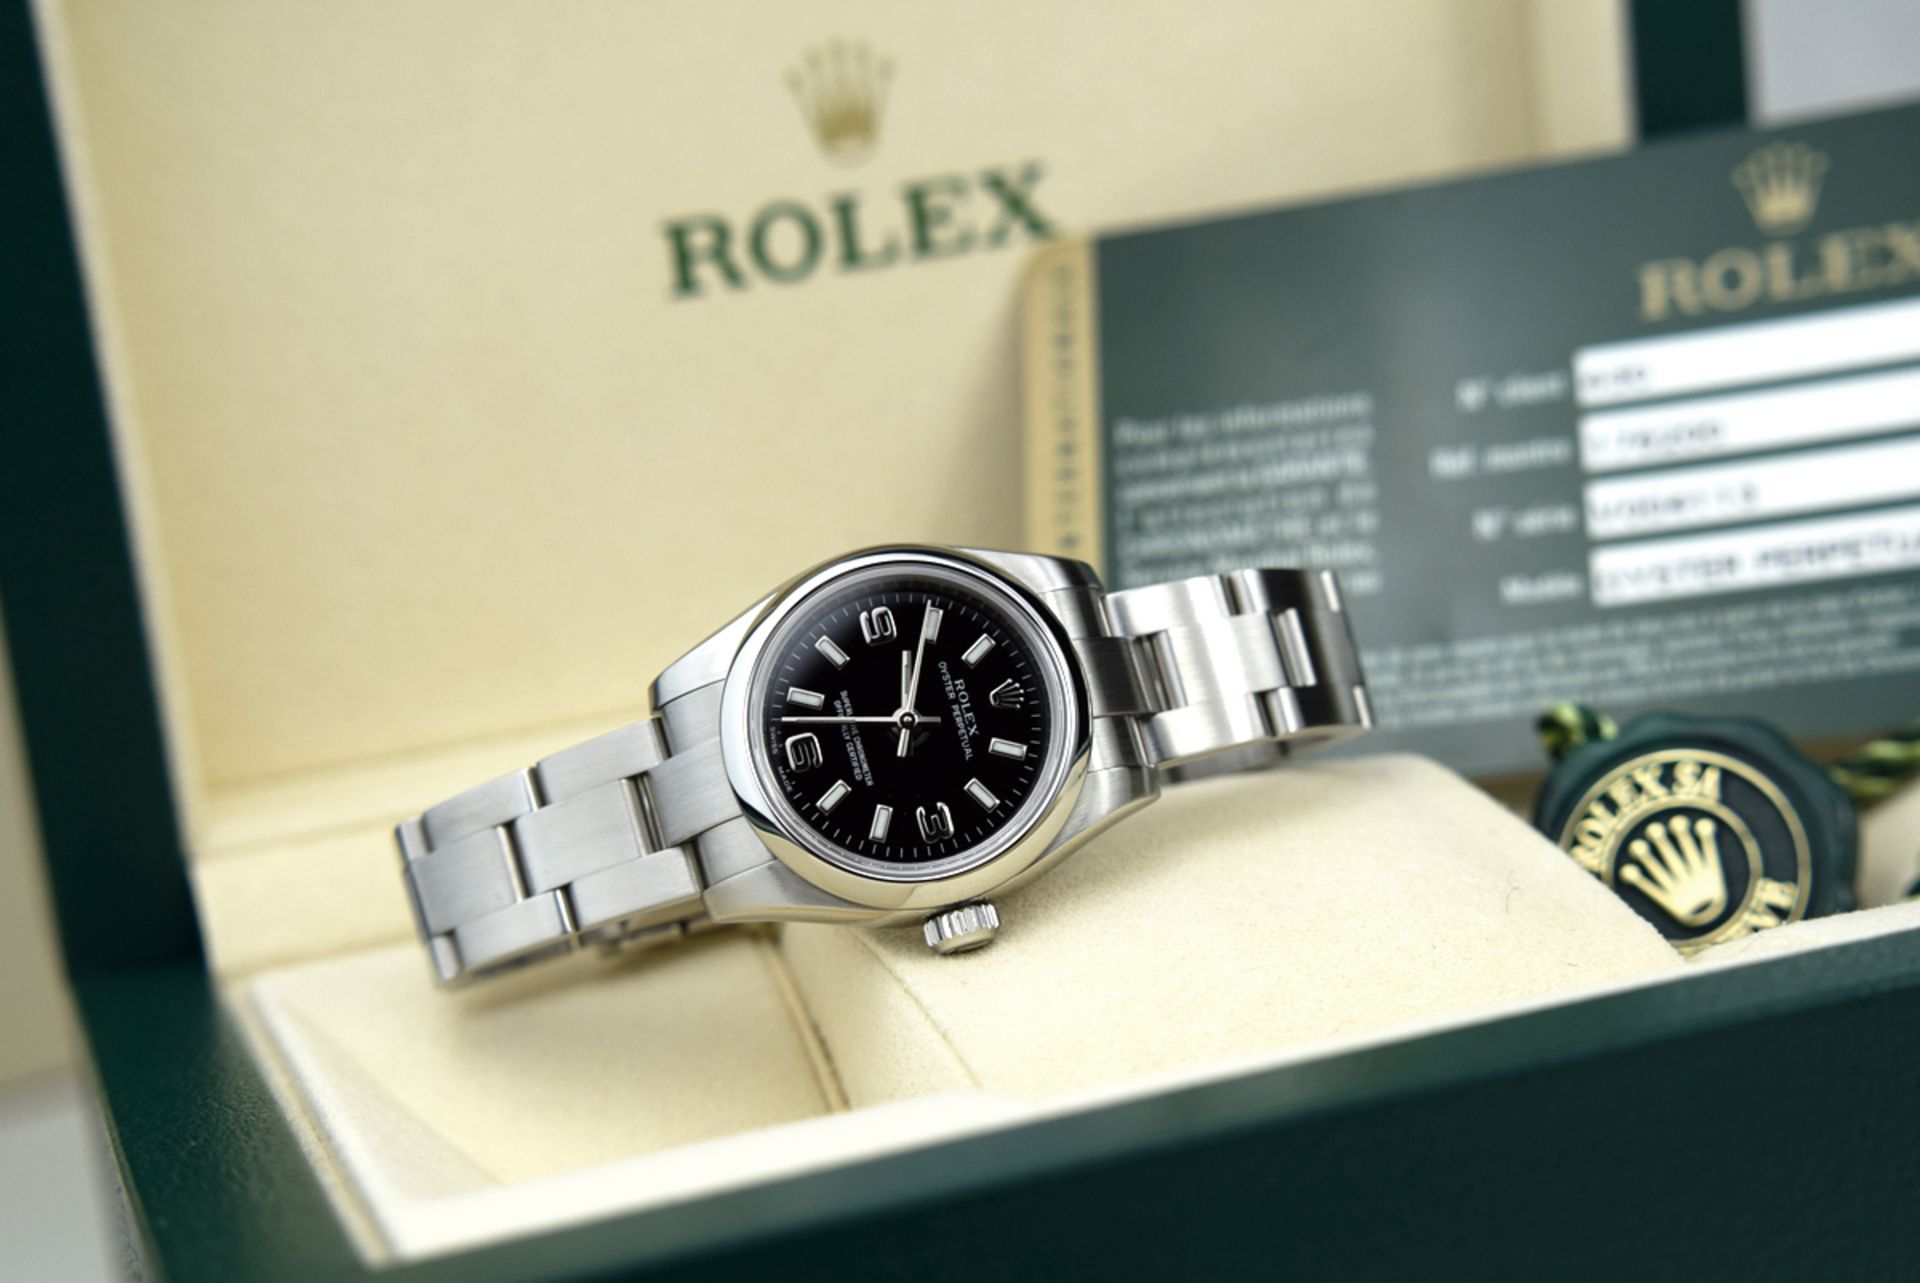 ROLEX - OYSTER PERPETUAL 26 - STEEL / BLACK DIAL (176200) - Image 4 of 8